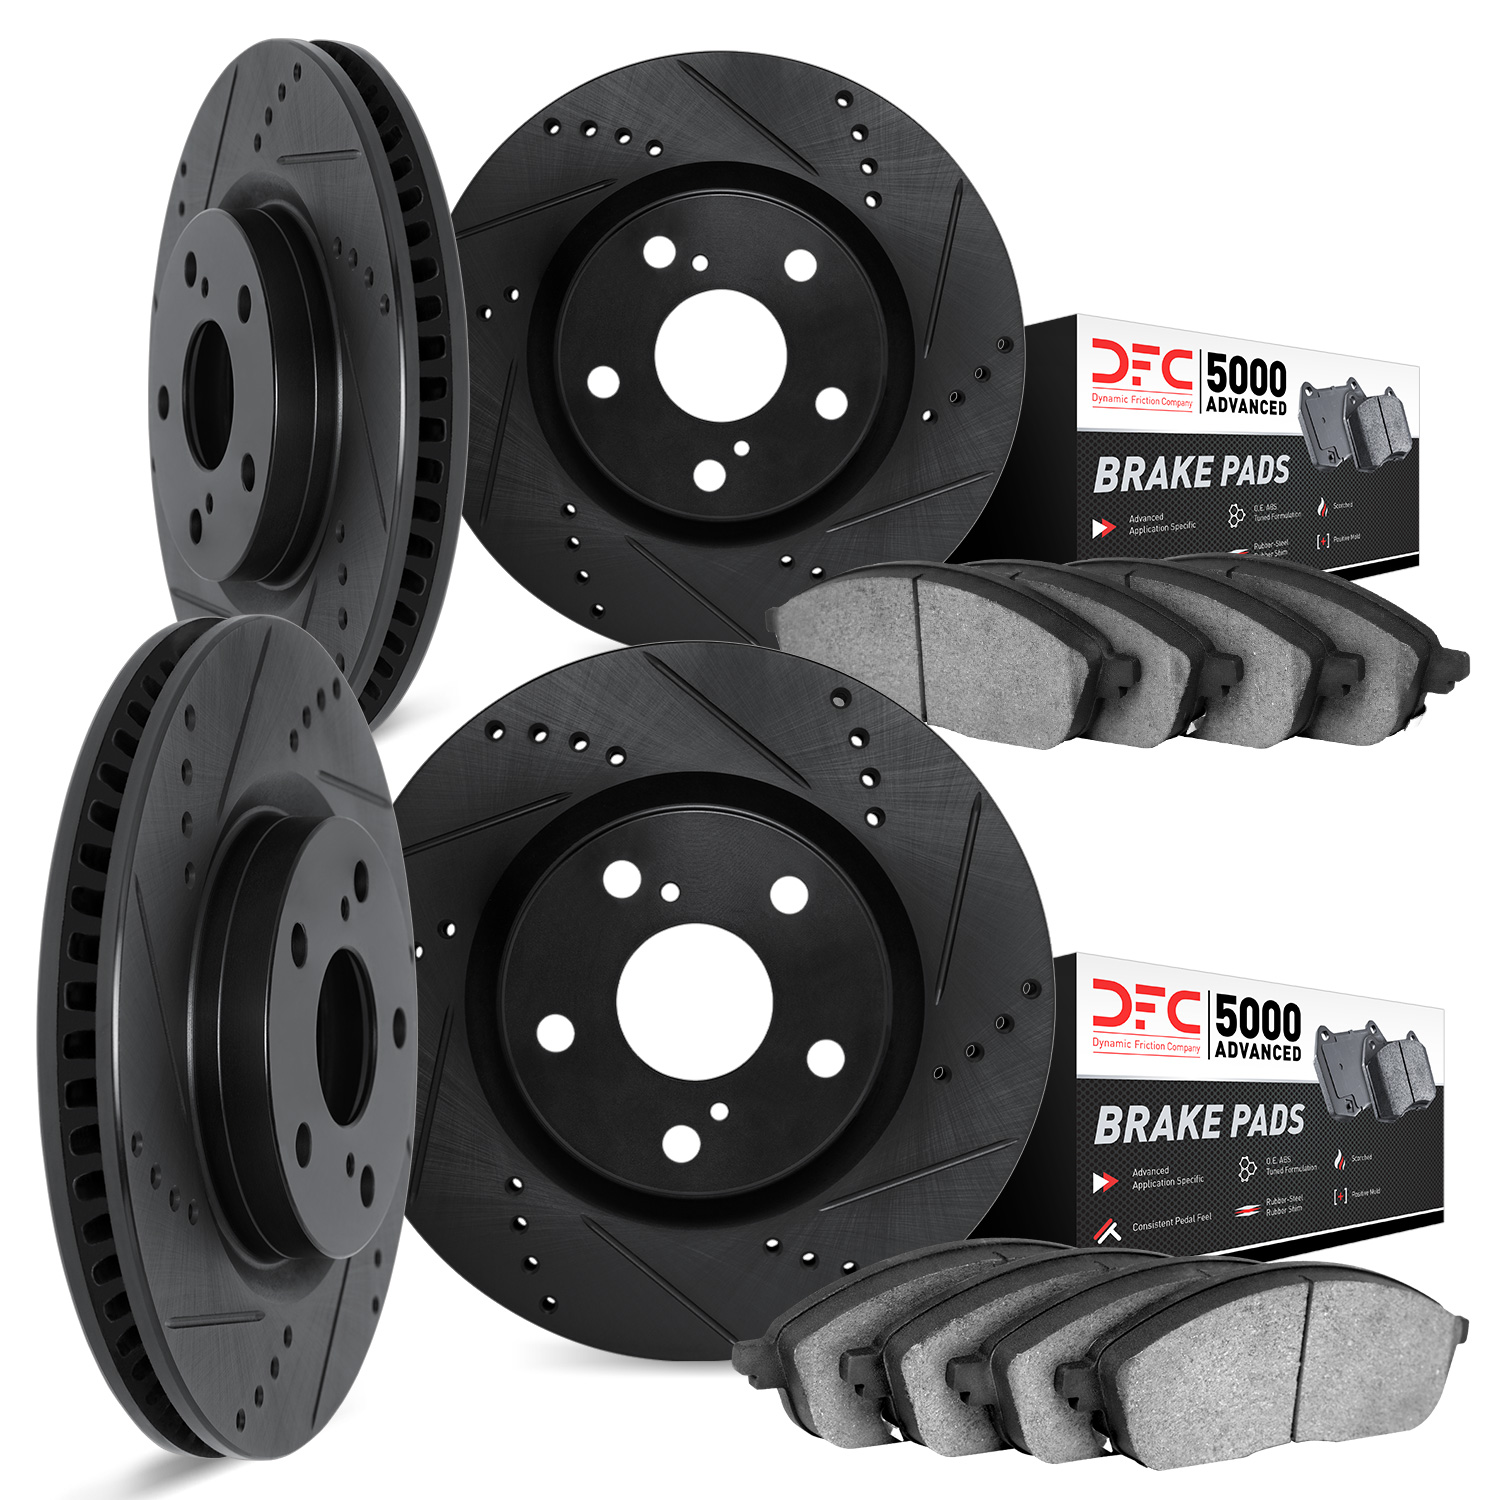 8504-31074 Dimpled/Slotted Brake Rotors w/5000 Advanced Brake Pads Kit [Black], 2016-2018 BMW, Position: Front and Rear